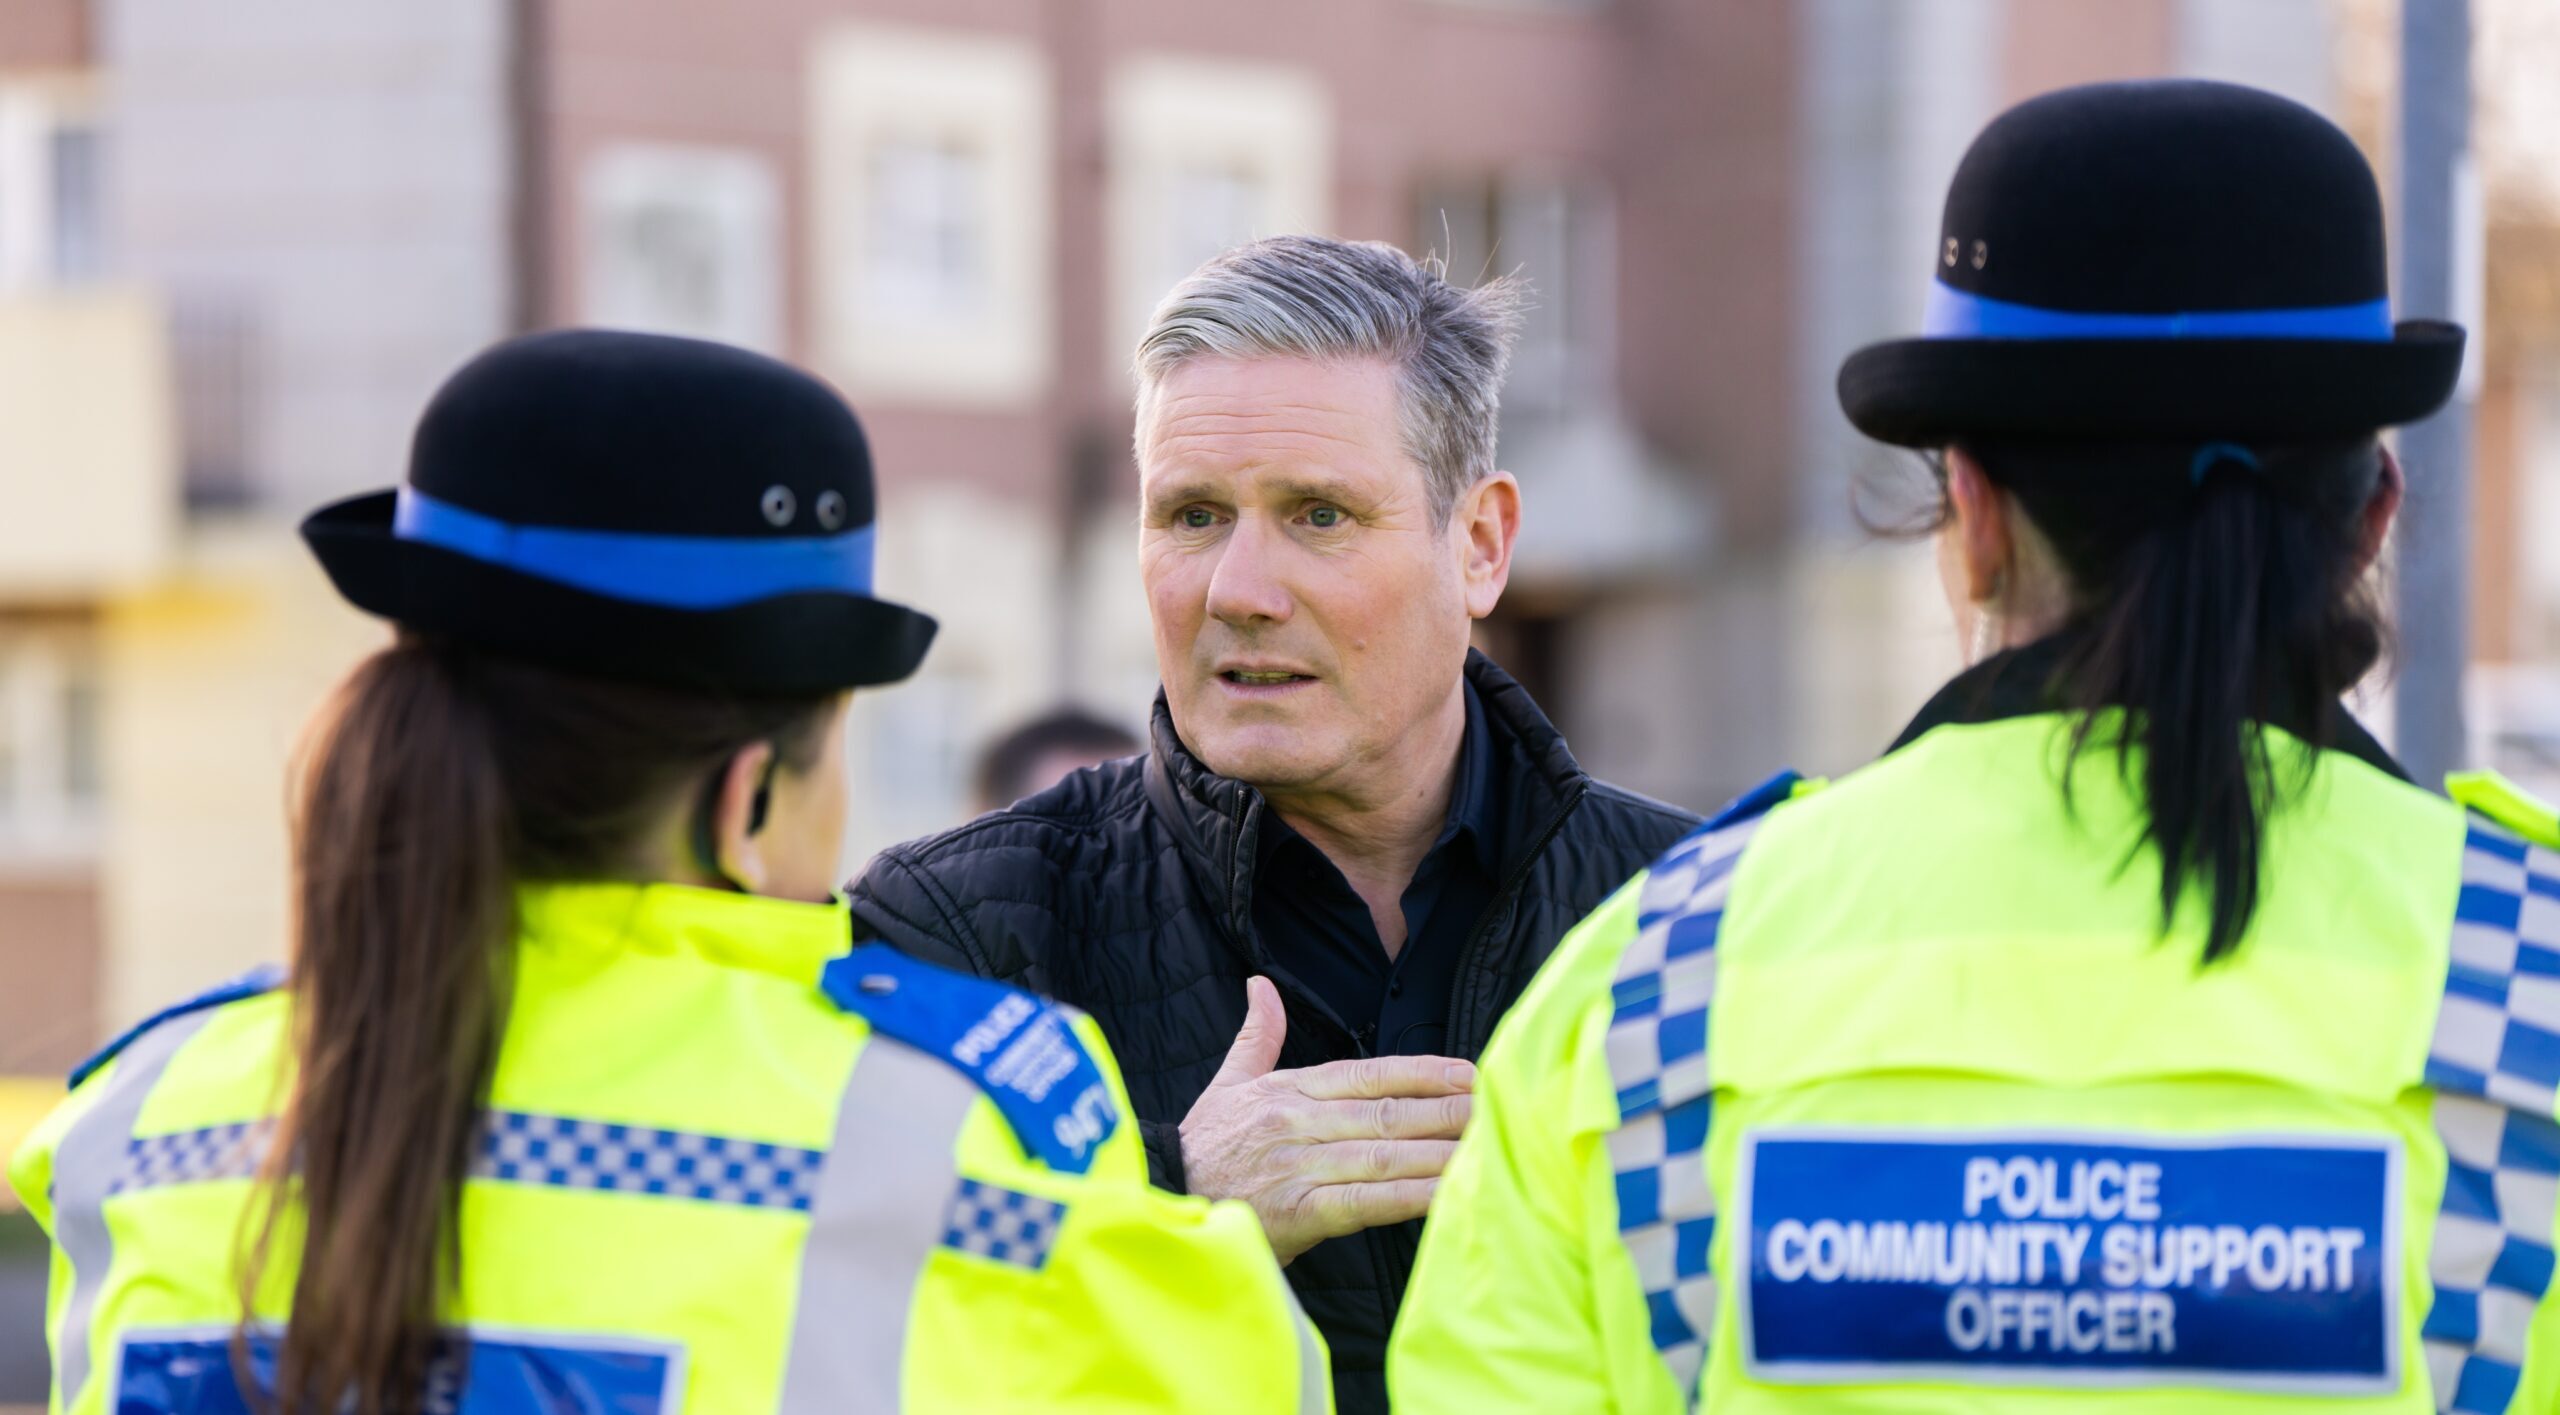 Keir Starmer talking to two Police Community Support Officers.